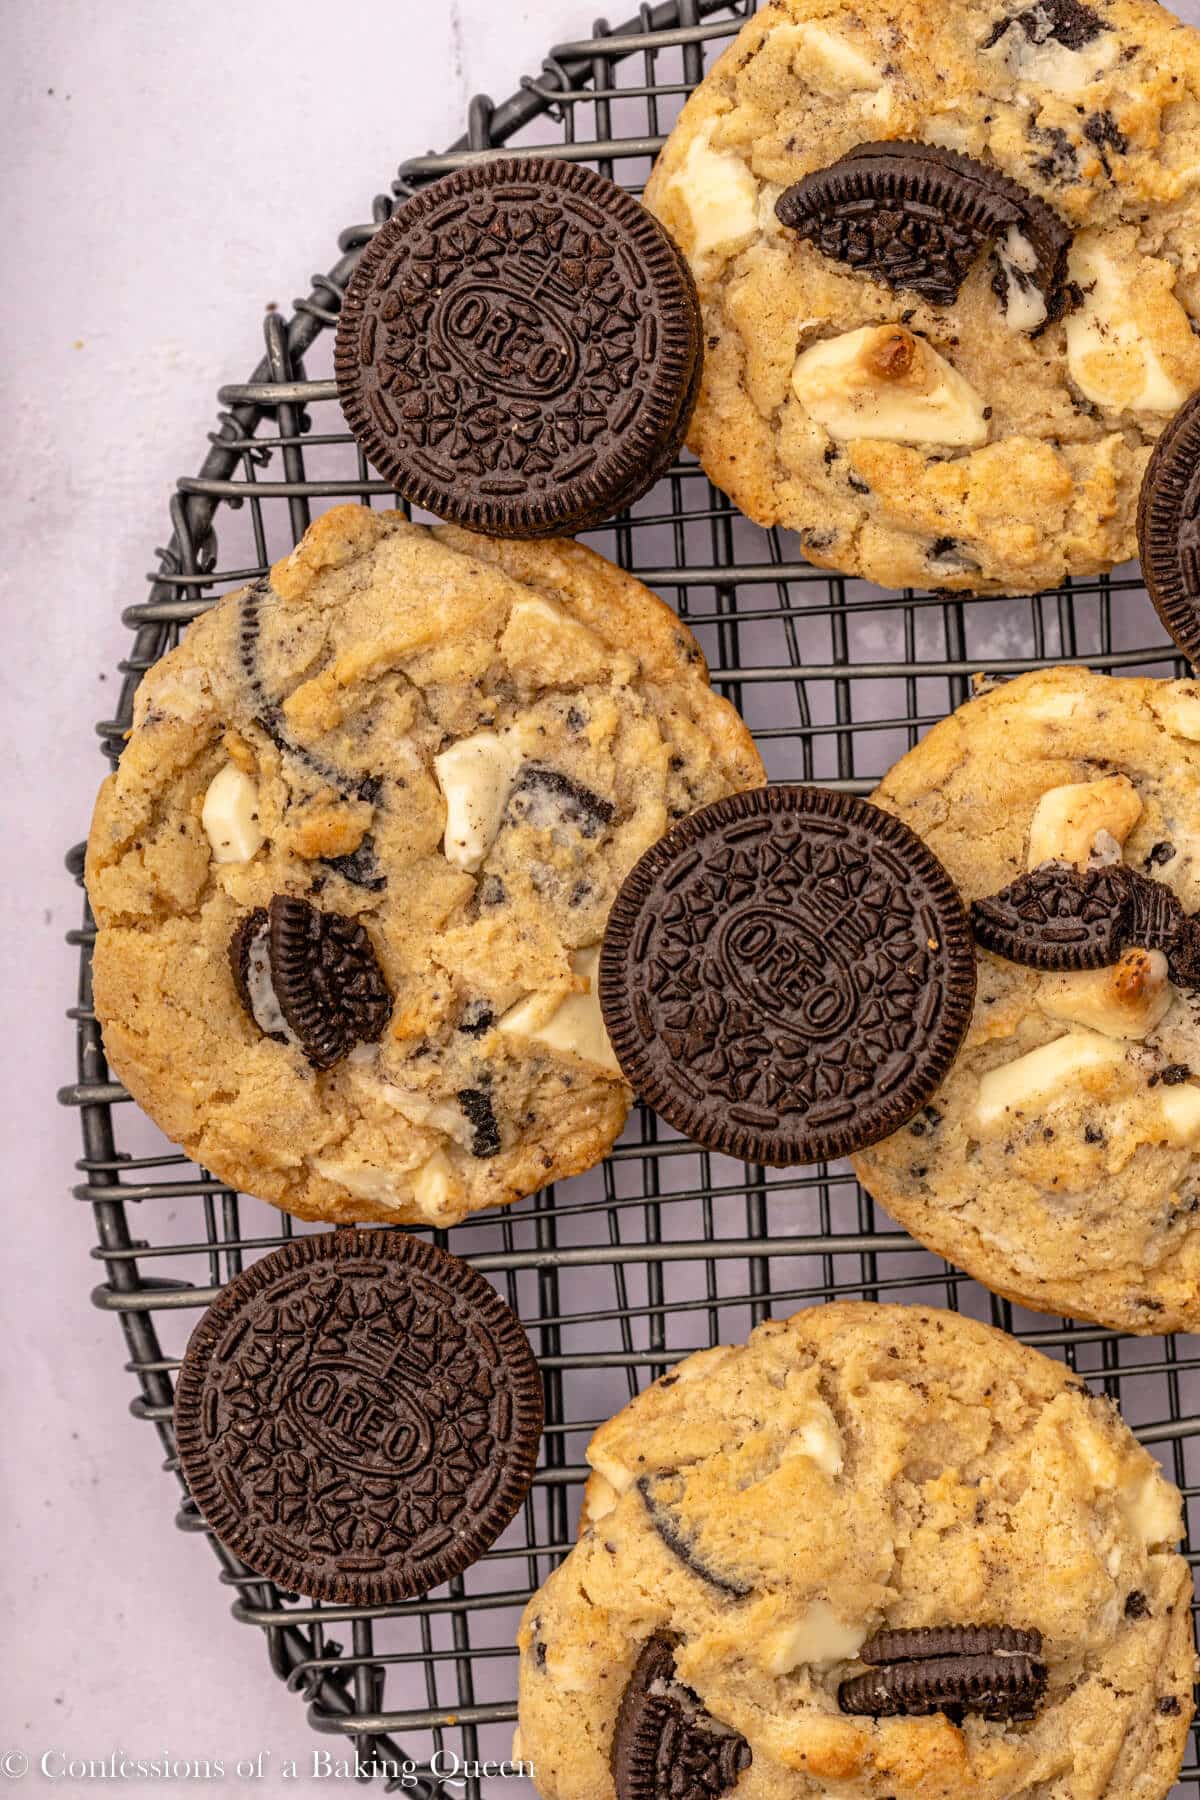 oreo and white chocolate chunk cookies on a wire rack on an light surface